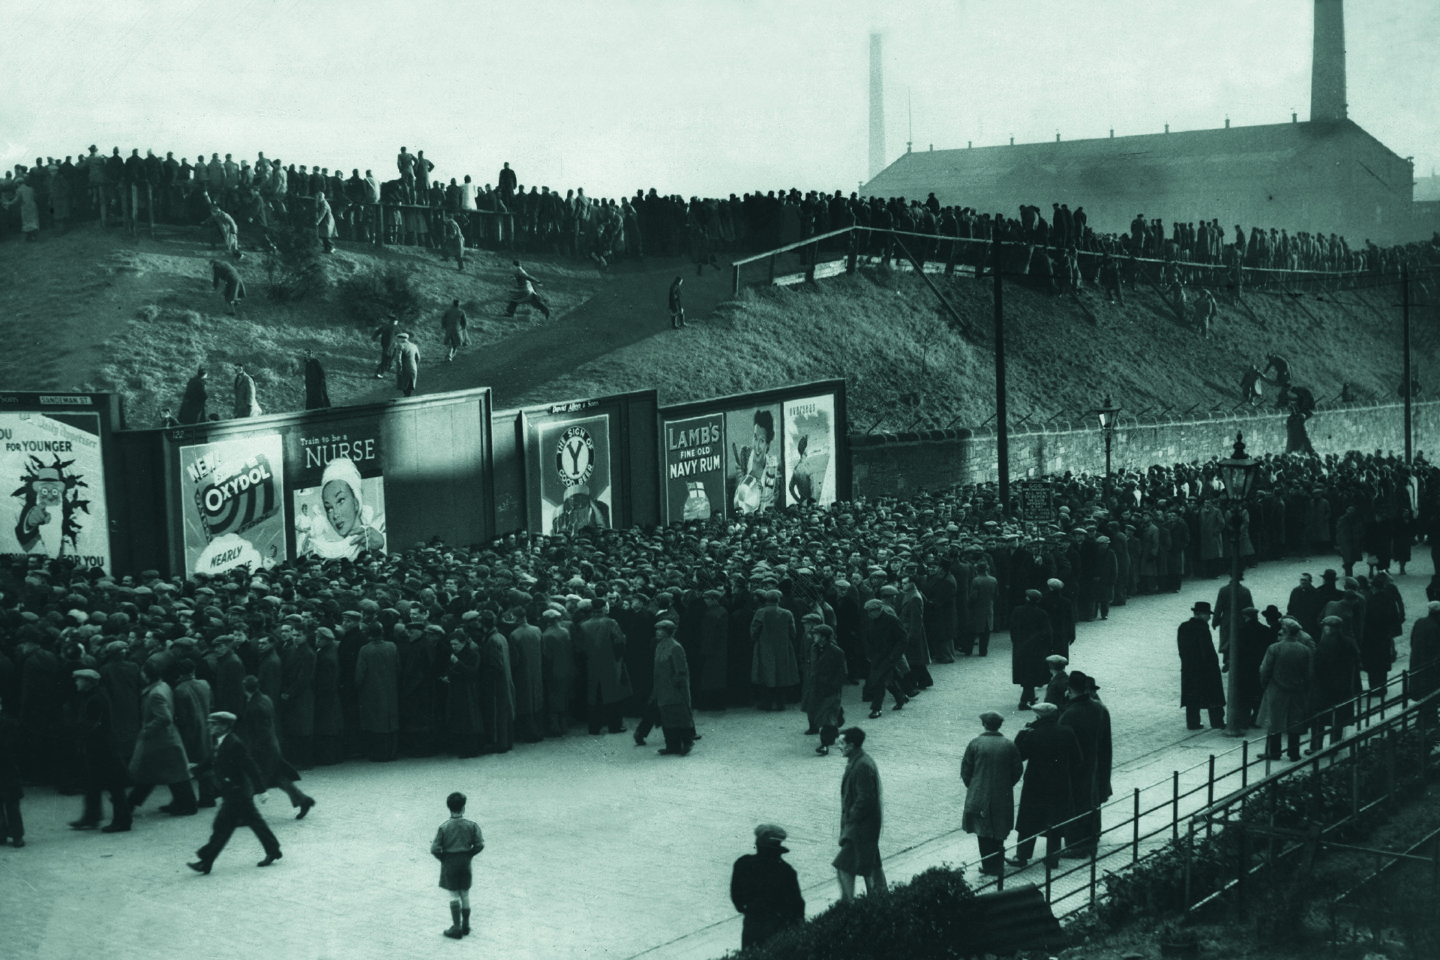 Fans gather for Dundee vs Rangers in 1949.